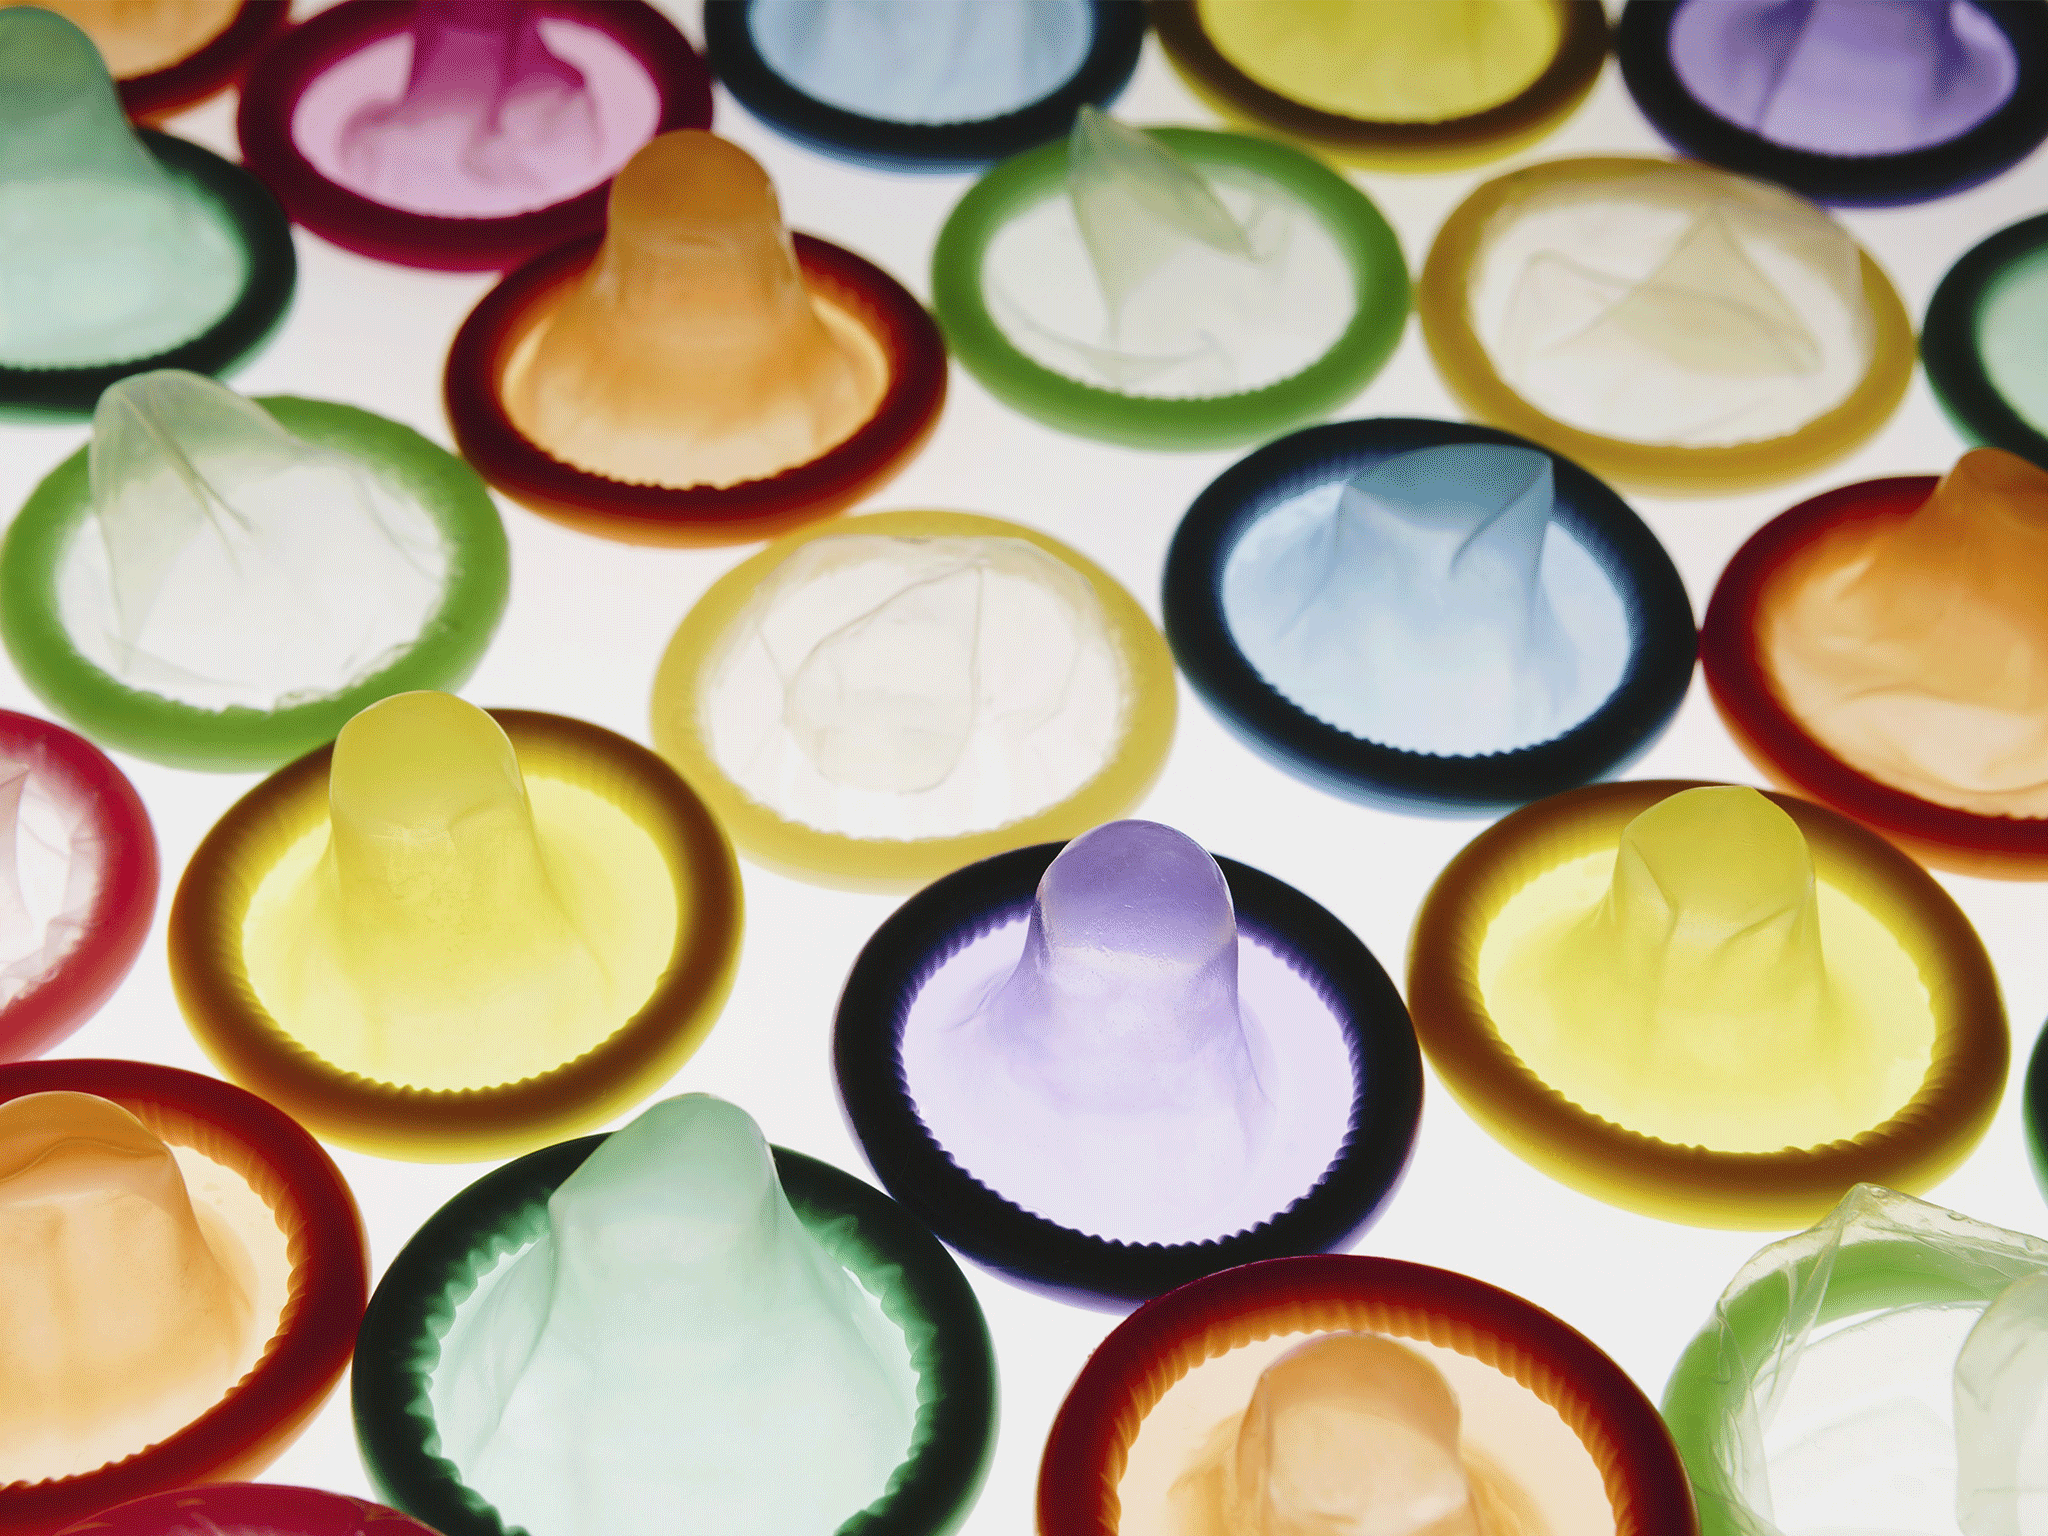 HIV ‘game changer’ drug linked with fall in condom use among gay men